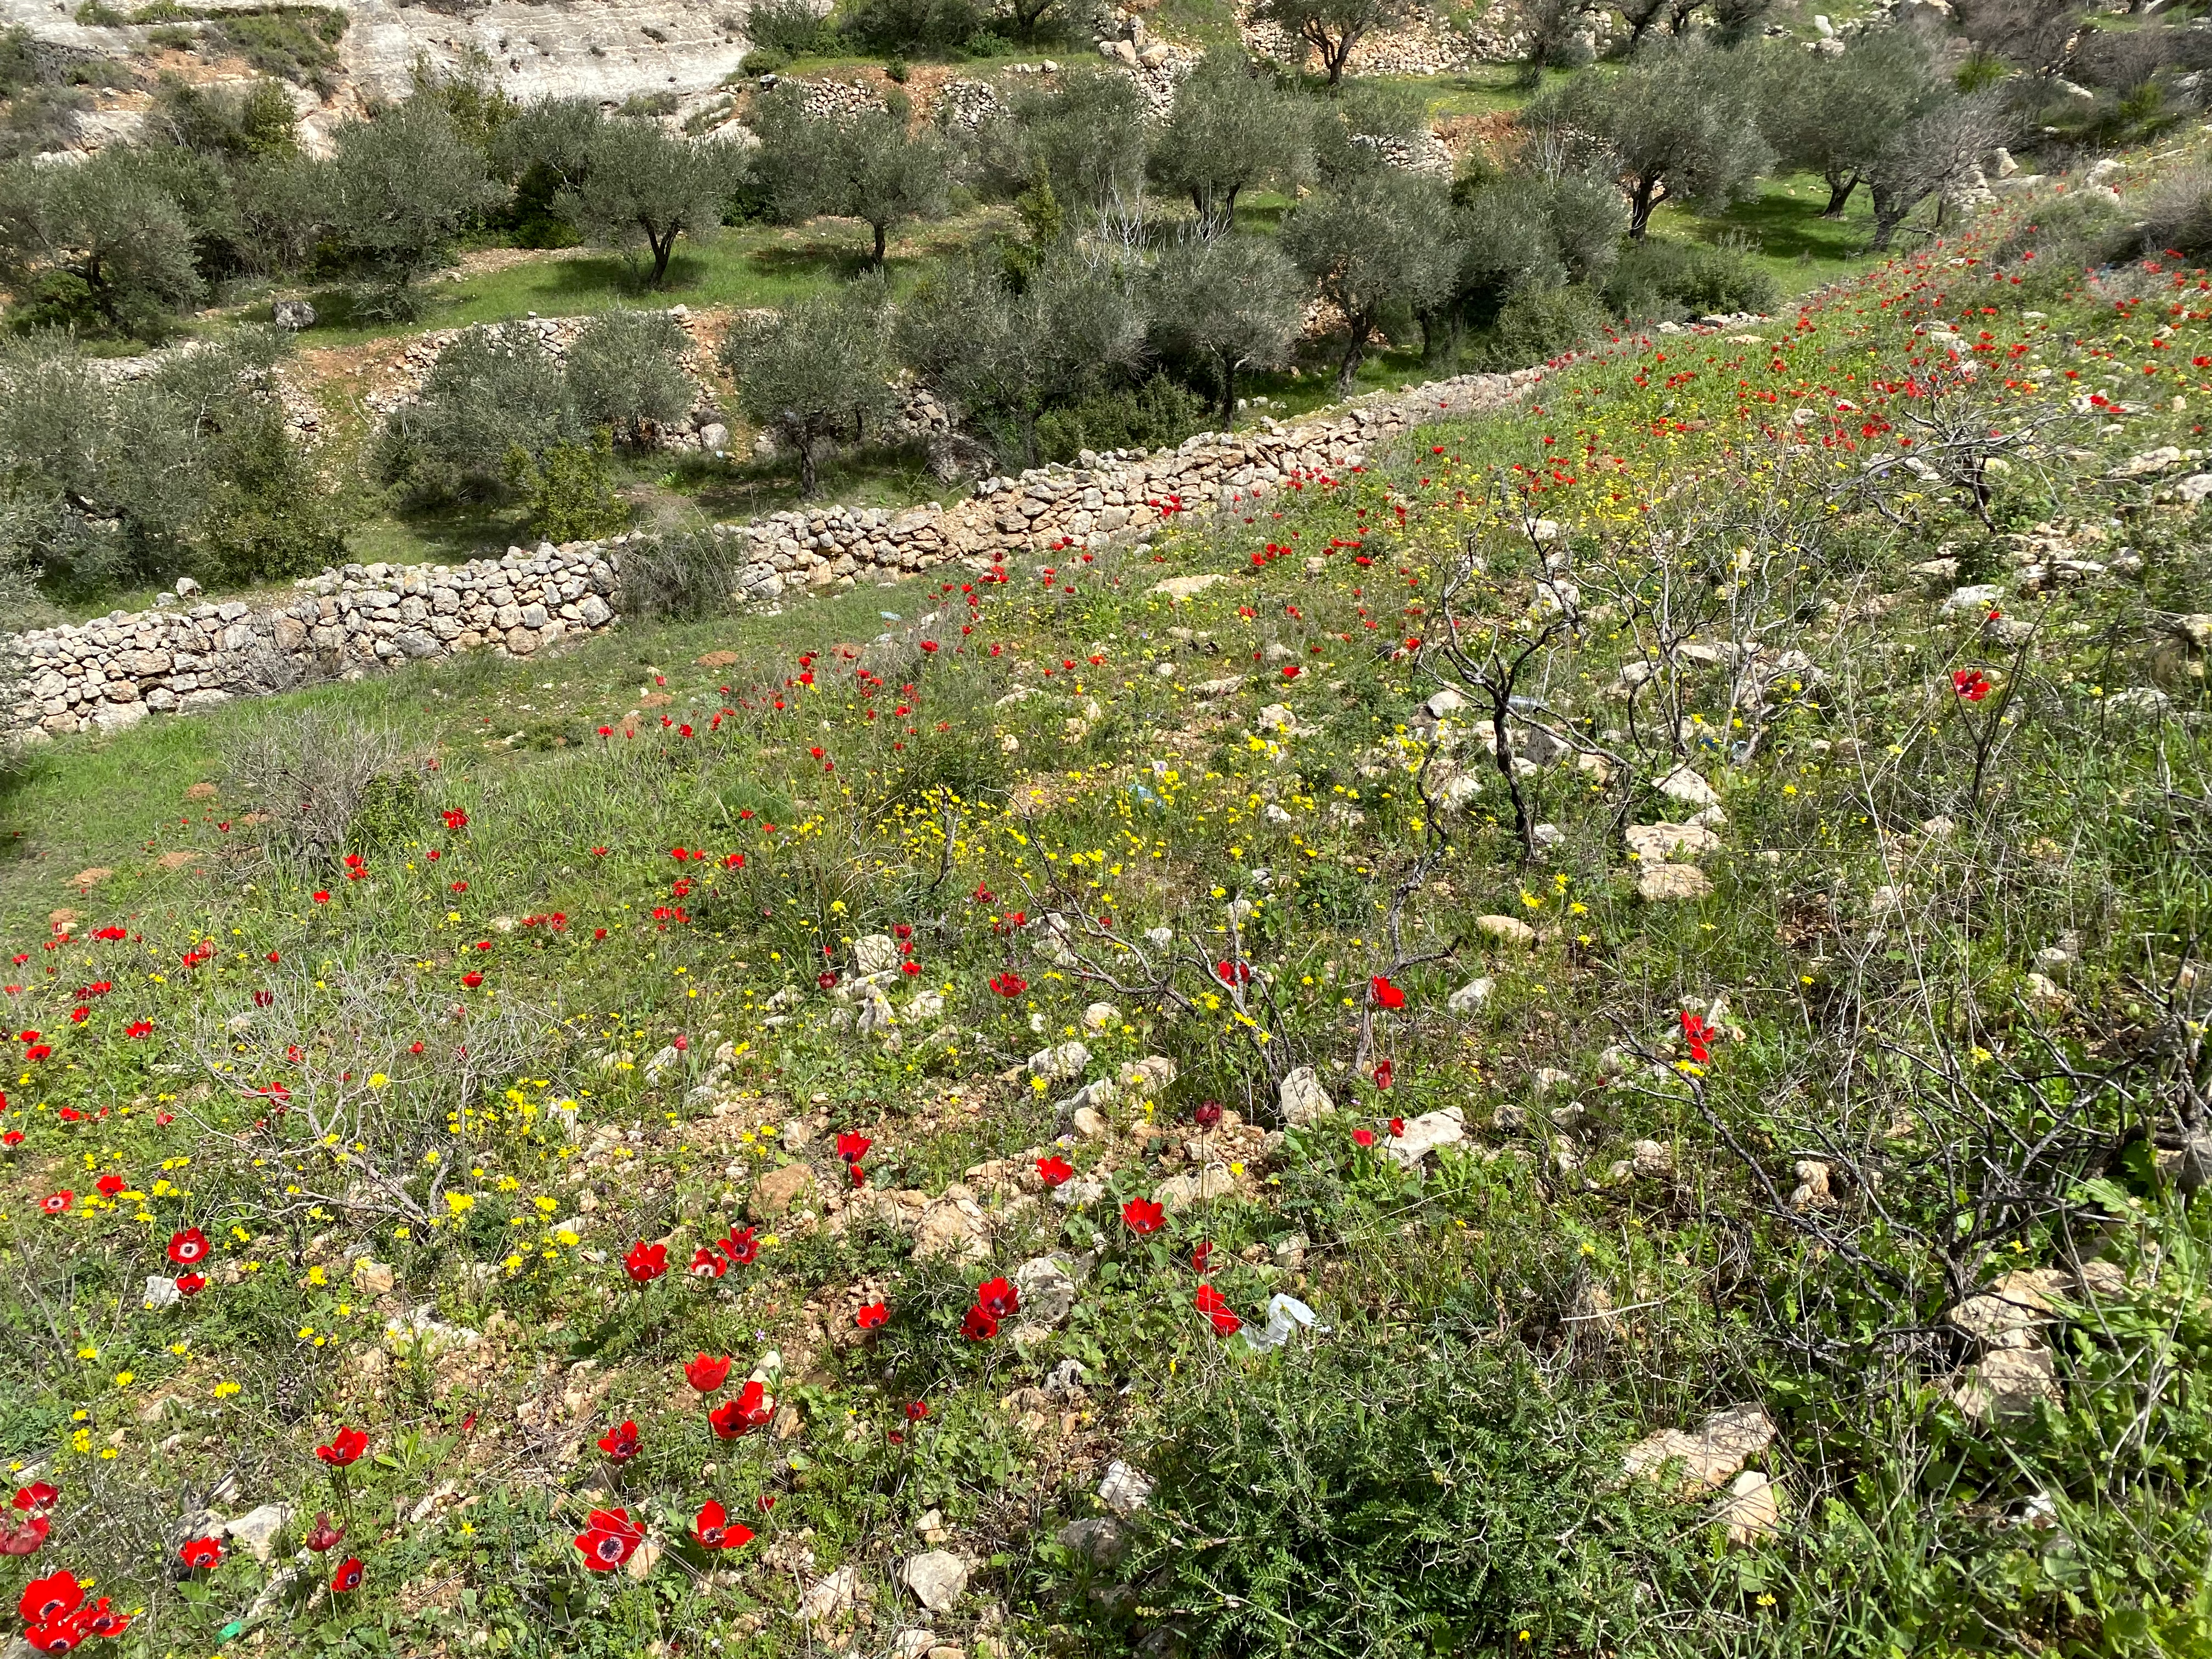 A landscape: red flowers (poppies) on a hill, trees and a stone wall in the distance downhill.